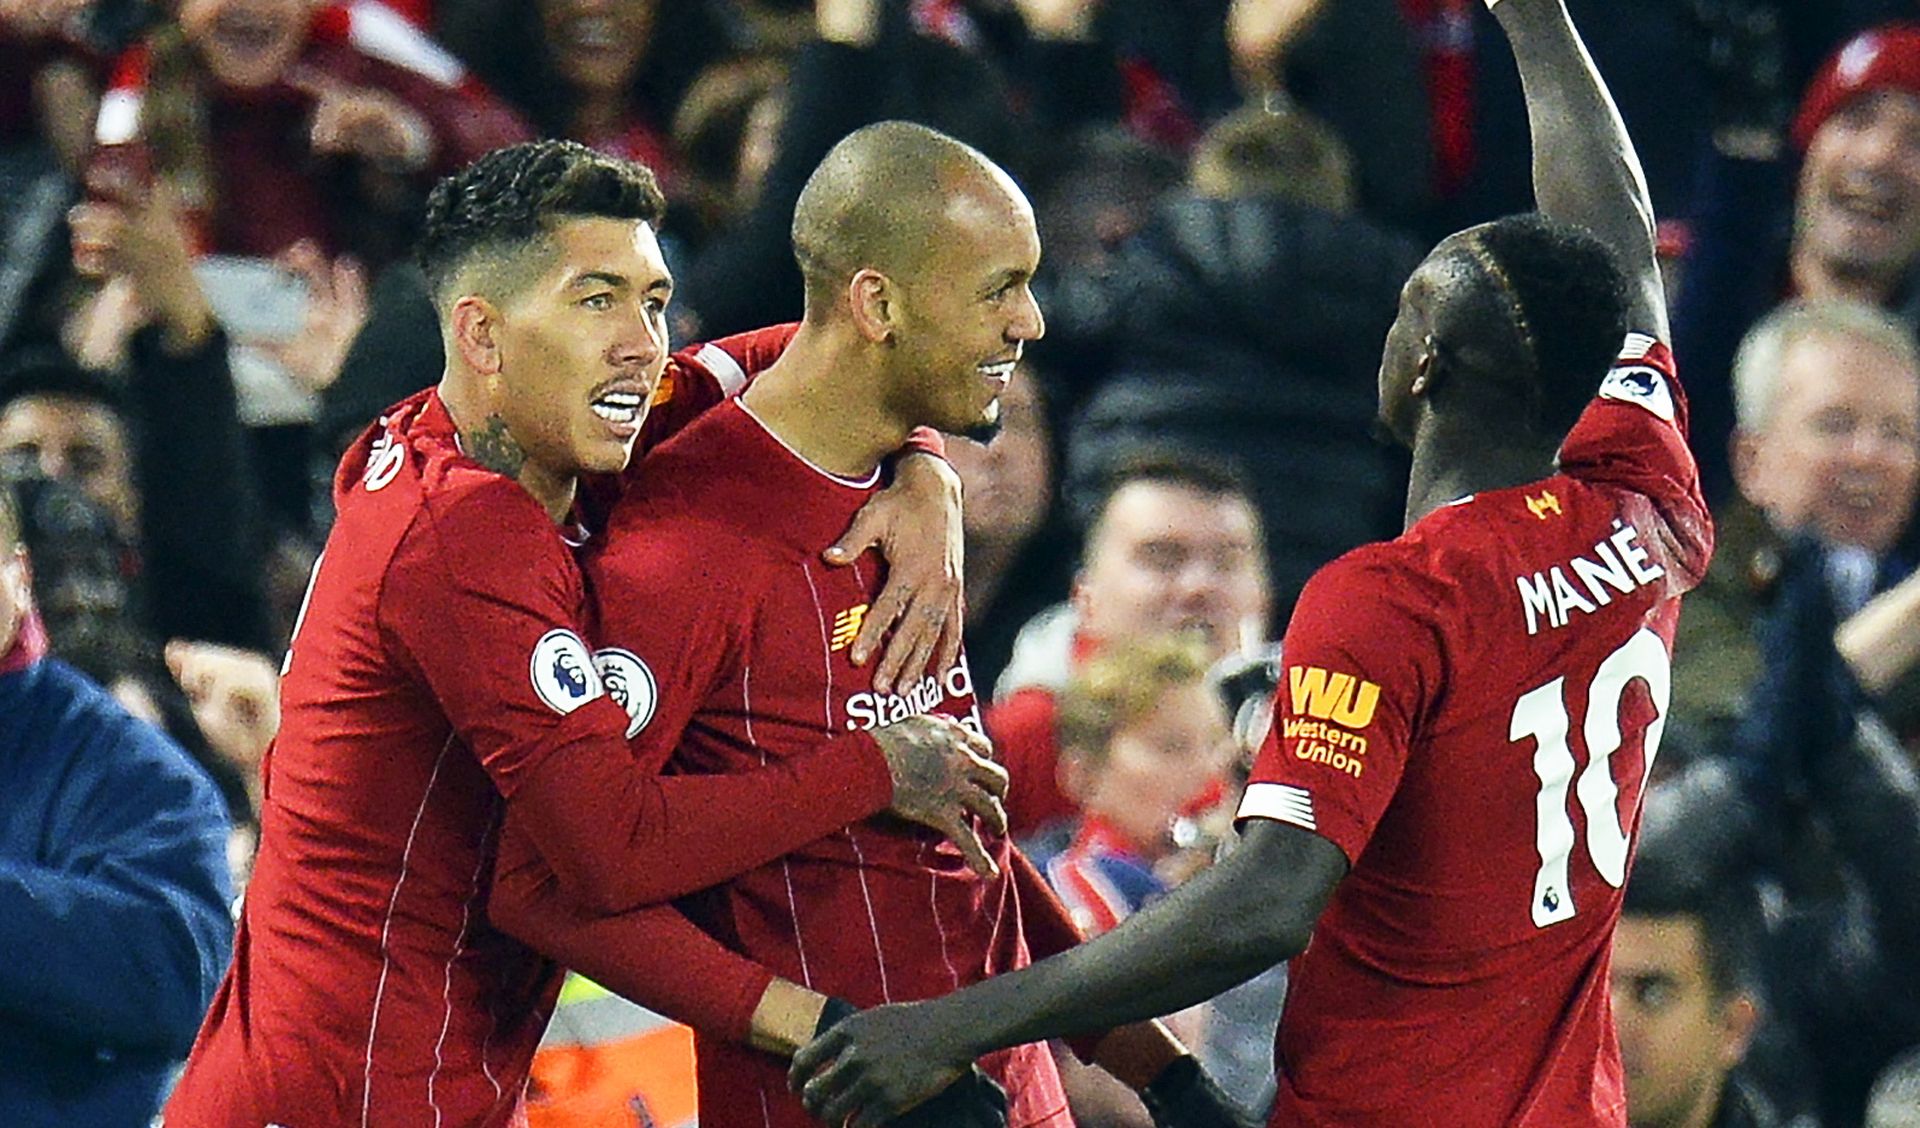 epa07986463 Fabinho (C) of Liverpool celebrates with teammates Roberto Firmino (L) and Sadio Mane (R) after scoring the 1-0 lead during the English Premier League soccer match between Liverpool FC and Manchester City in Liverpool, Britain, 10 November 2019.  EPA/PETER POWELL EDITORIAL USE ONLY. No use with unauthorized audio, video, data, fixture lists, club/league logos or 'live' services. Online in-match use limited to 120 images, no video emulation. No use in betting, games or single club/league/player publications